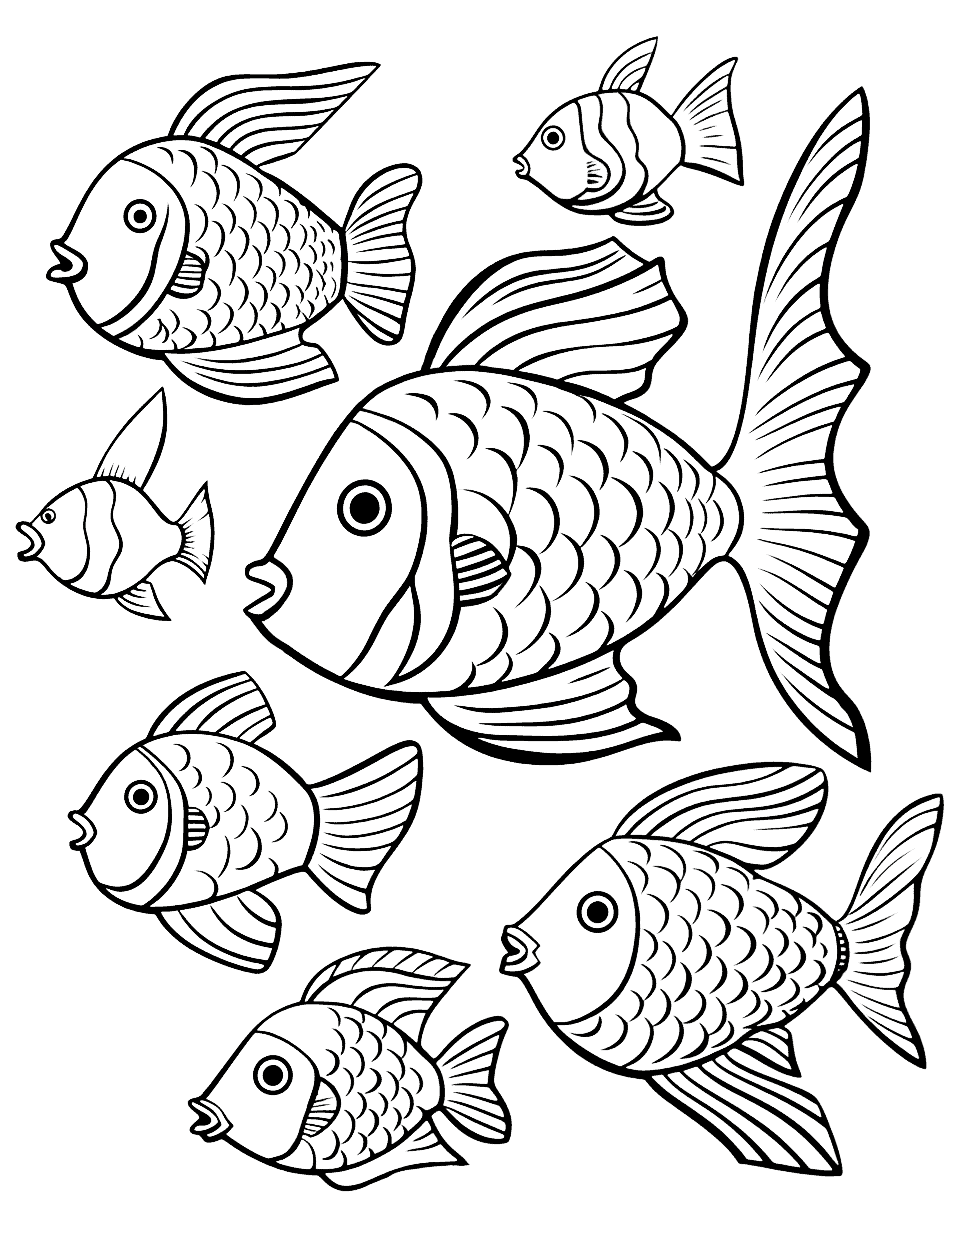 Tropical Fish Parade Coloring Page - Various tropical fish, with vibrant colors and unique patterns, swimming together.